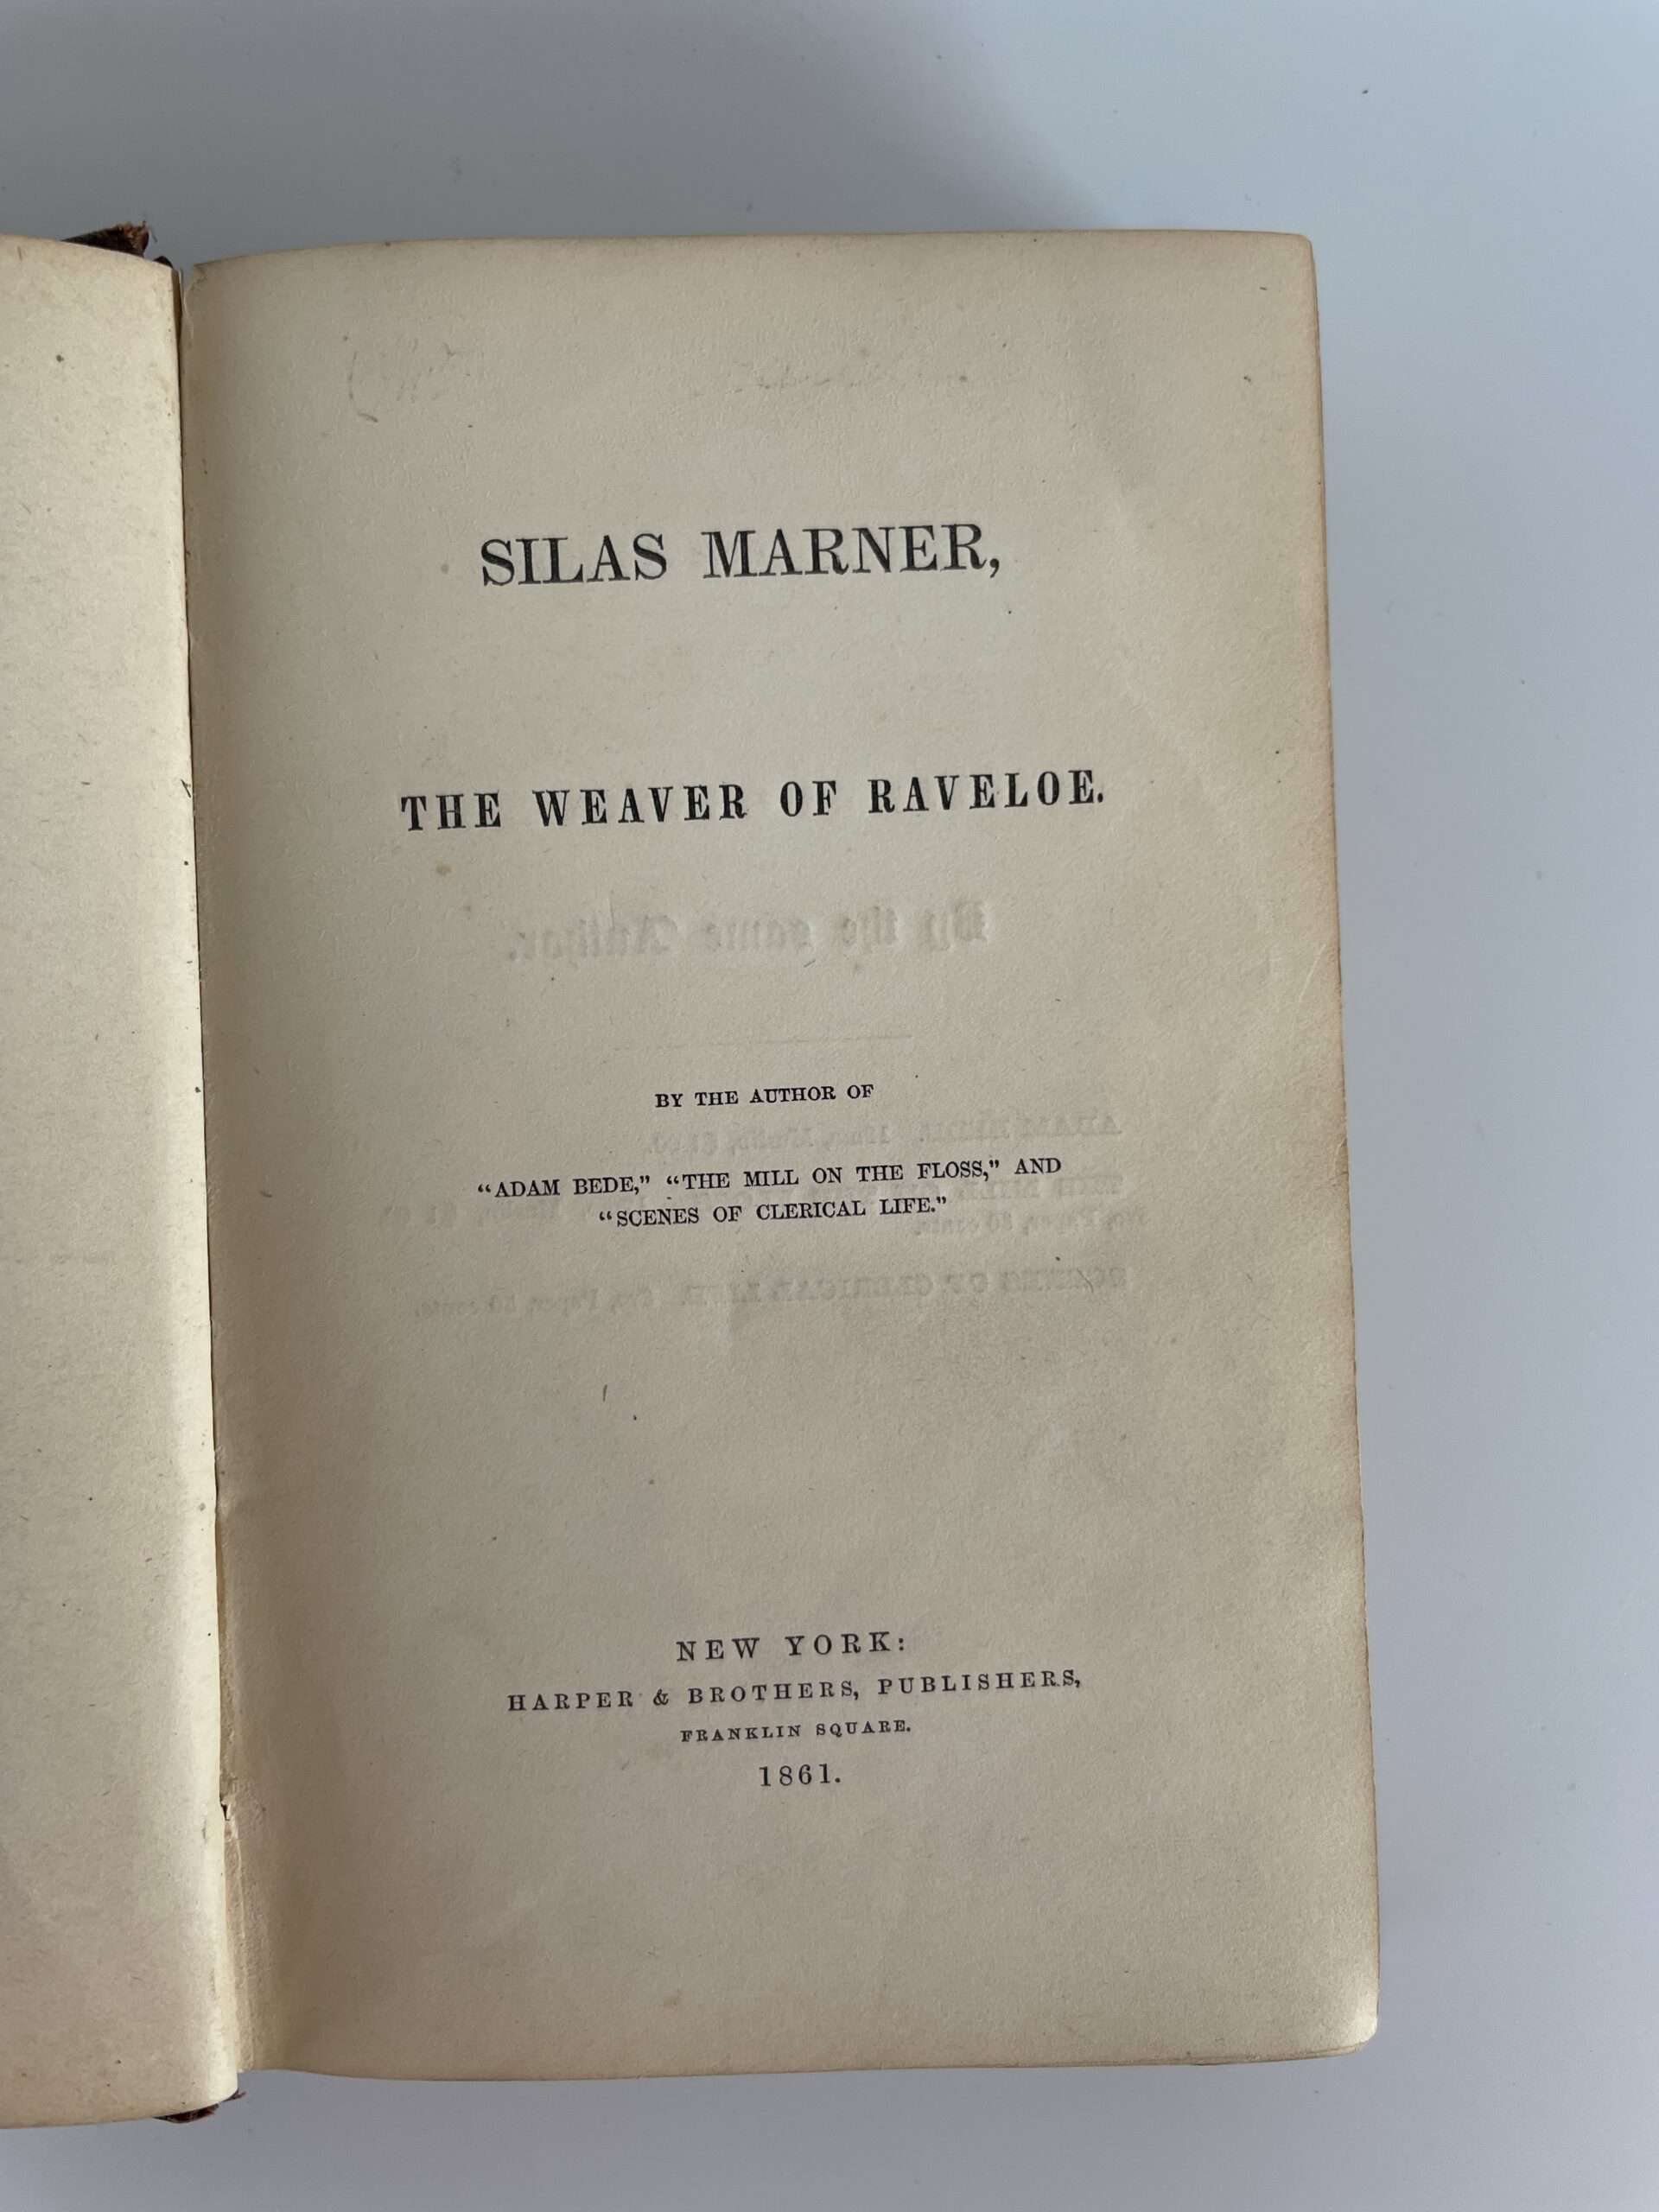 george eliot silas marner first edition2